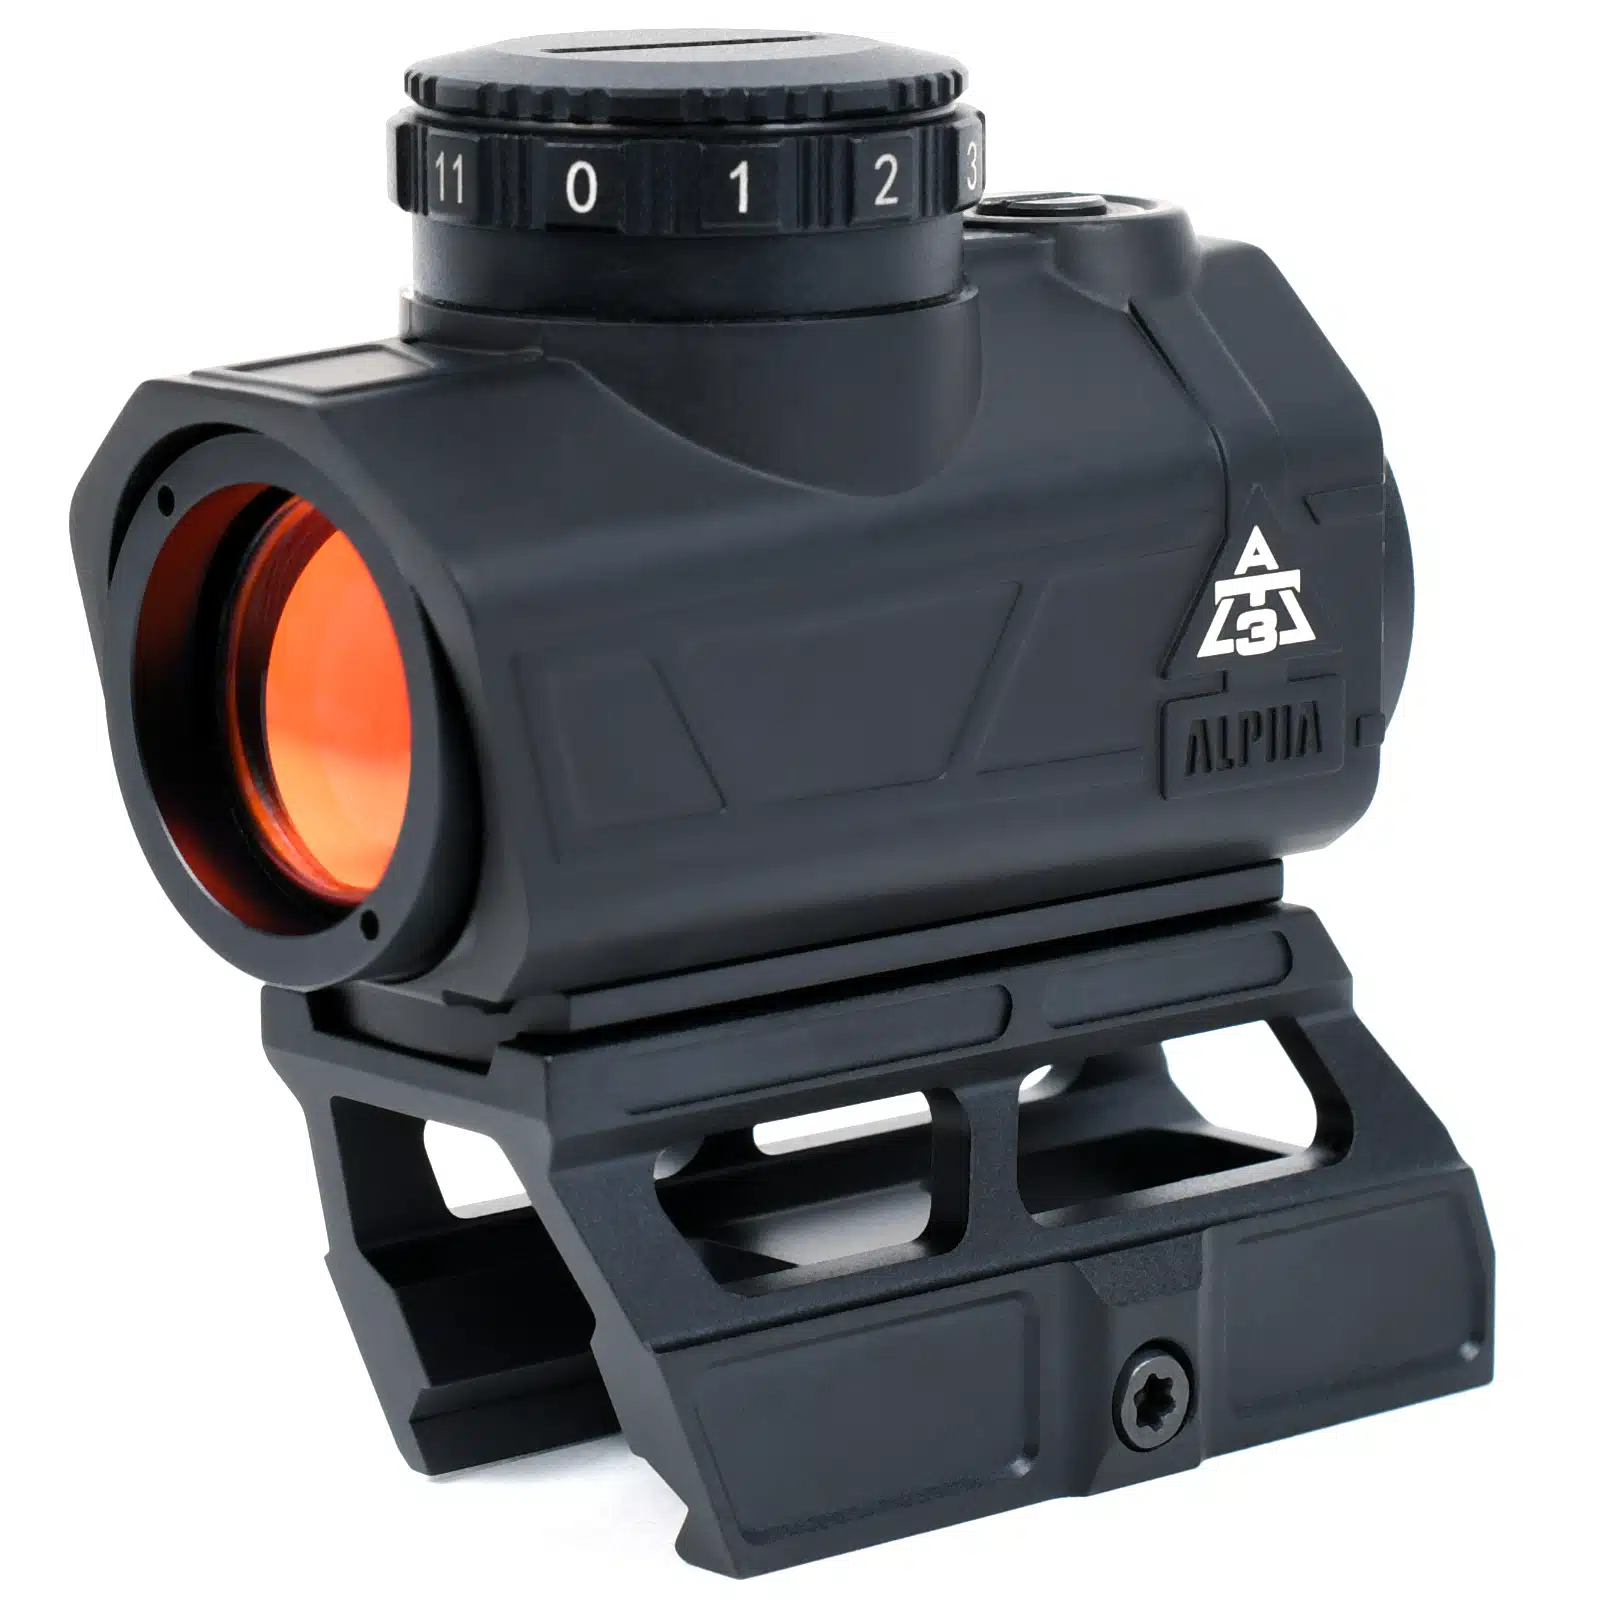 AT3™ ALPHA Micro Red Dot Sight with Shake Awake and Cantilever Riser Mount